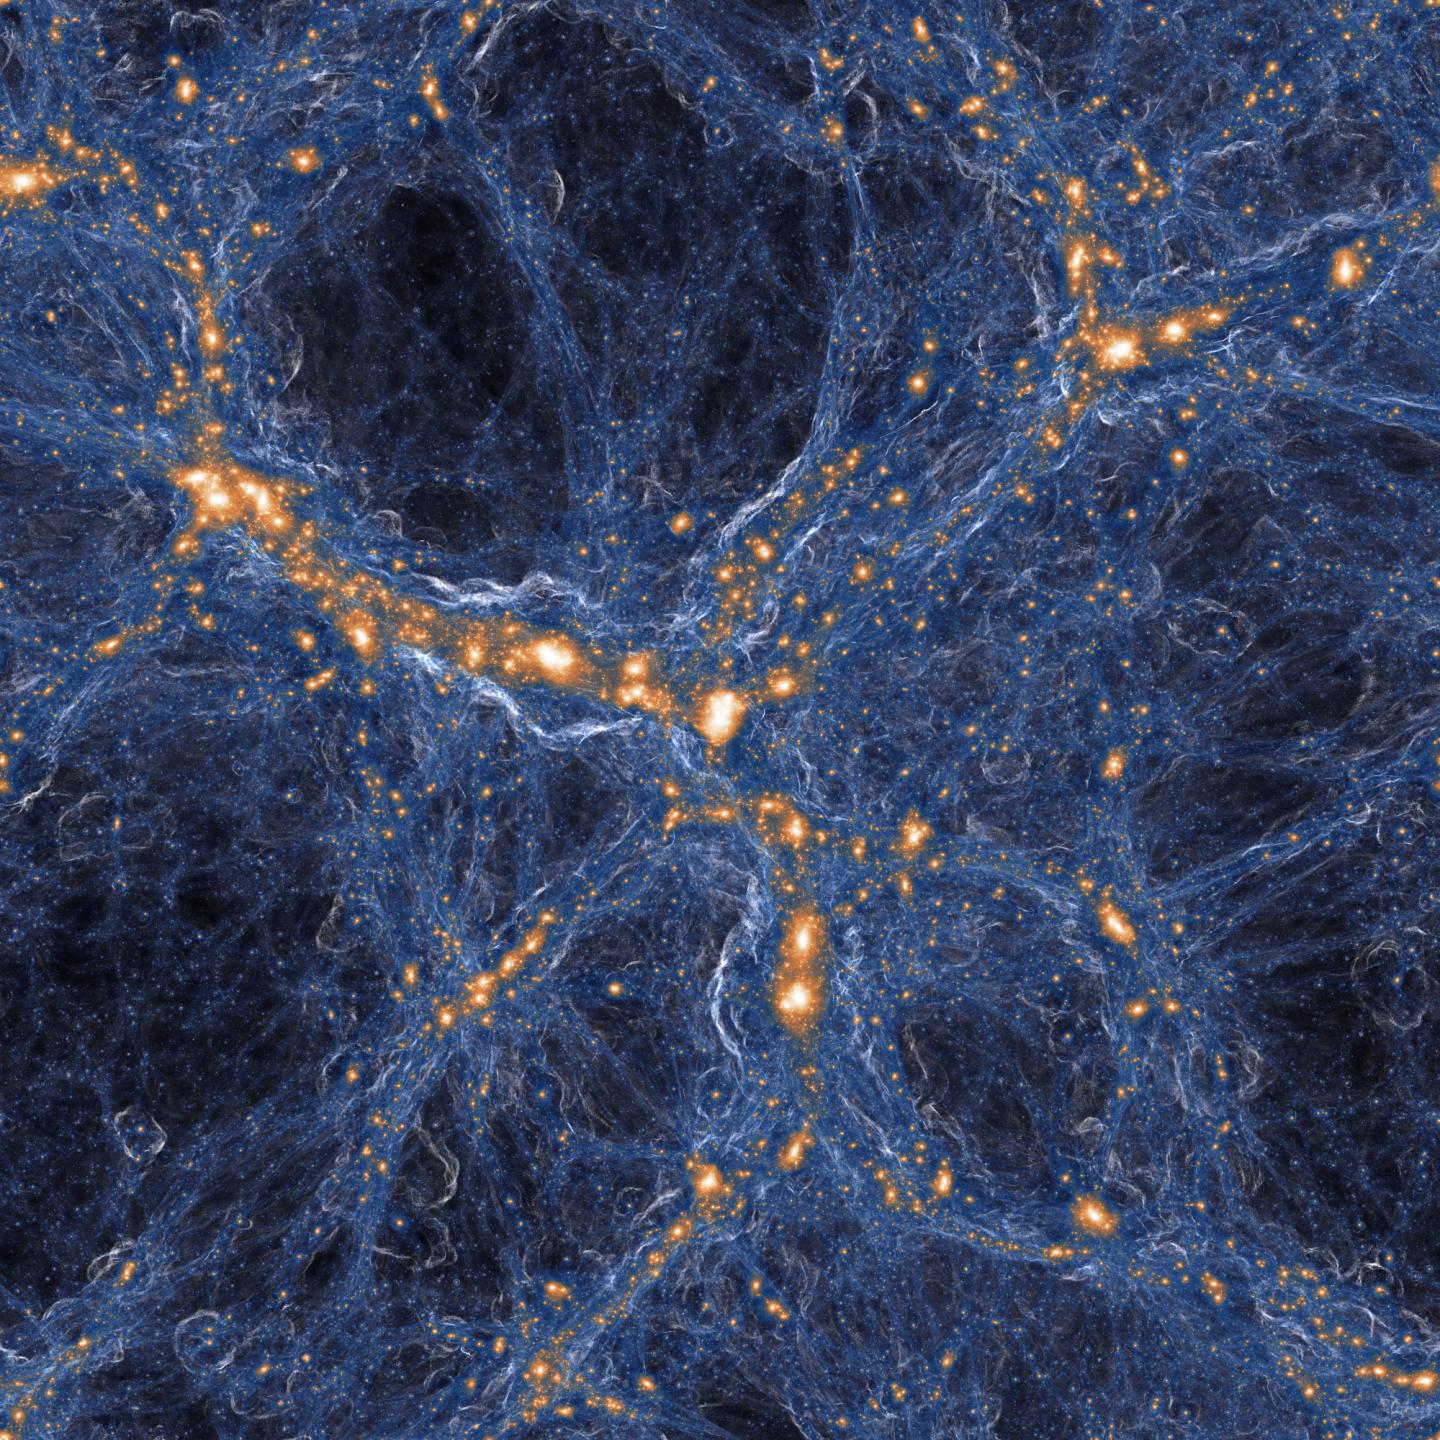 Simulation of Galaxies and Gas in the Universe